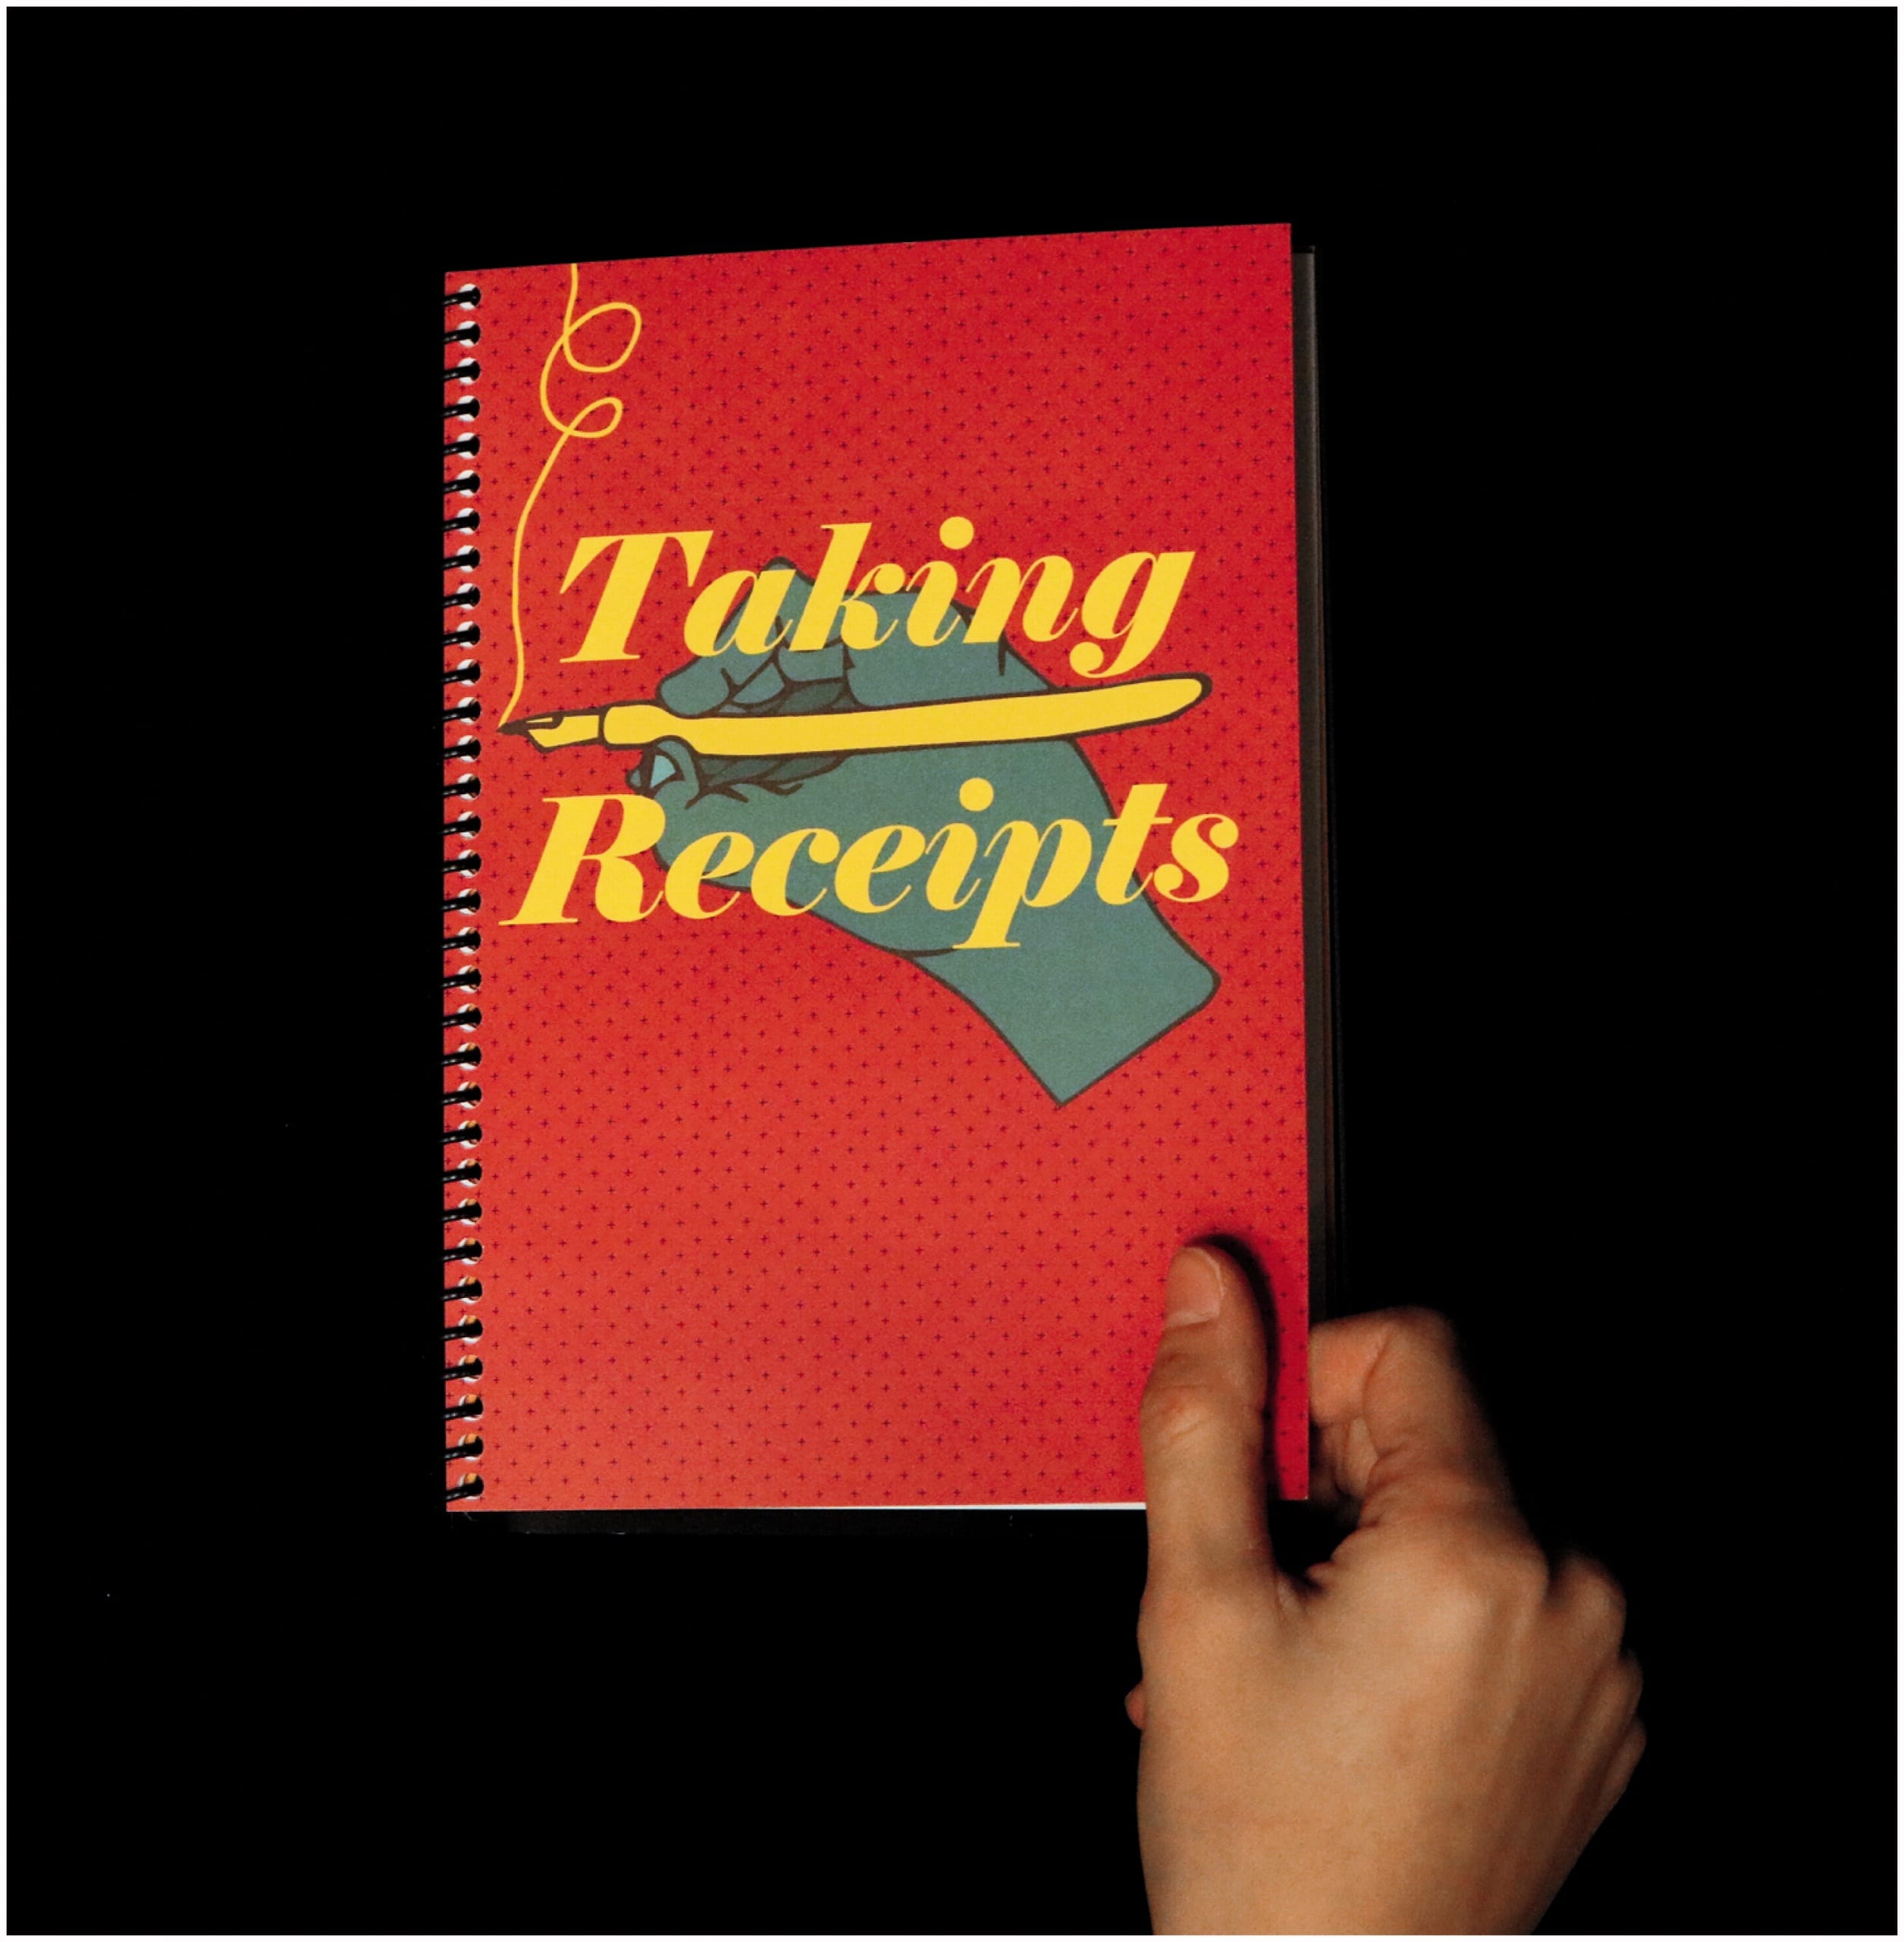 Color photo of a hand opening a spiral-bound notebook. The cover of the notebook is red, and featuers an illustration of a hand drawing something with a yellow pen. The text on the front reads "Taking Receipts."